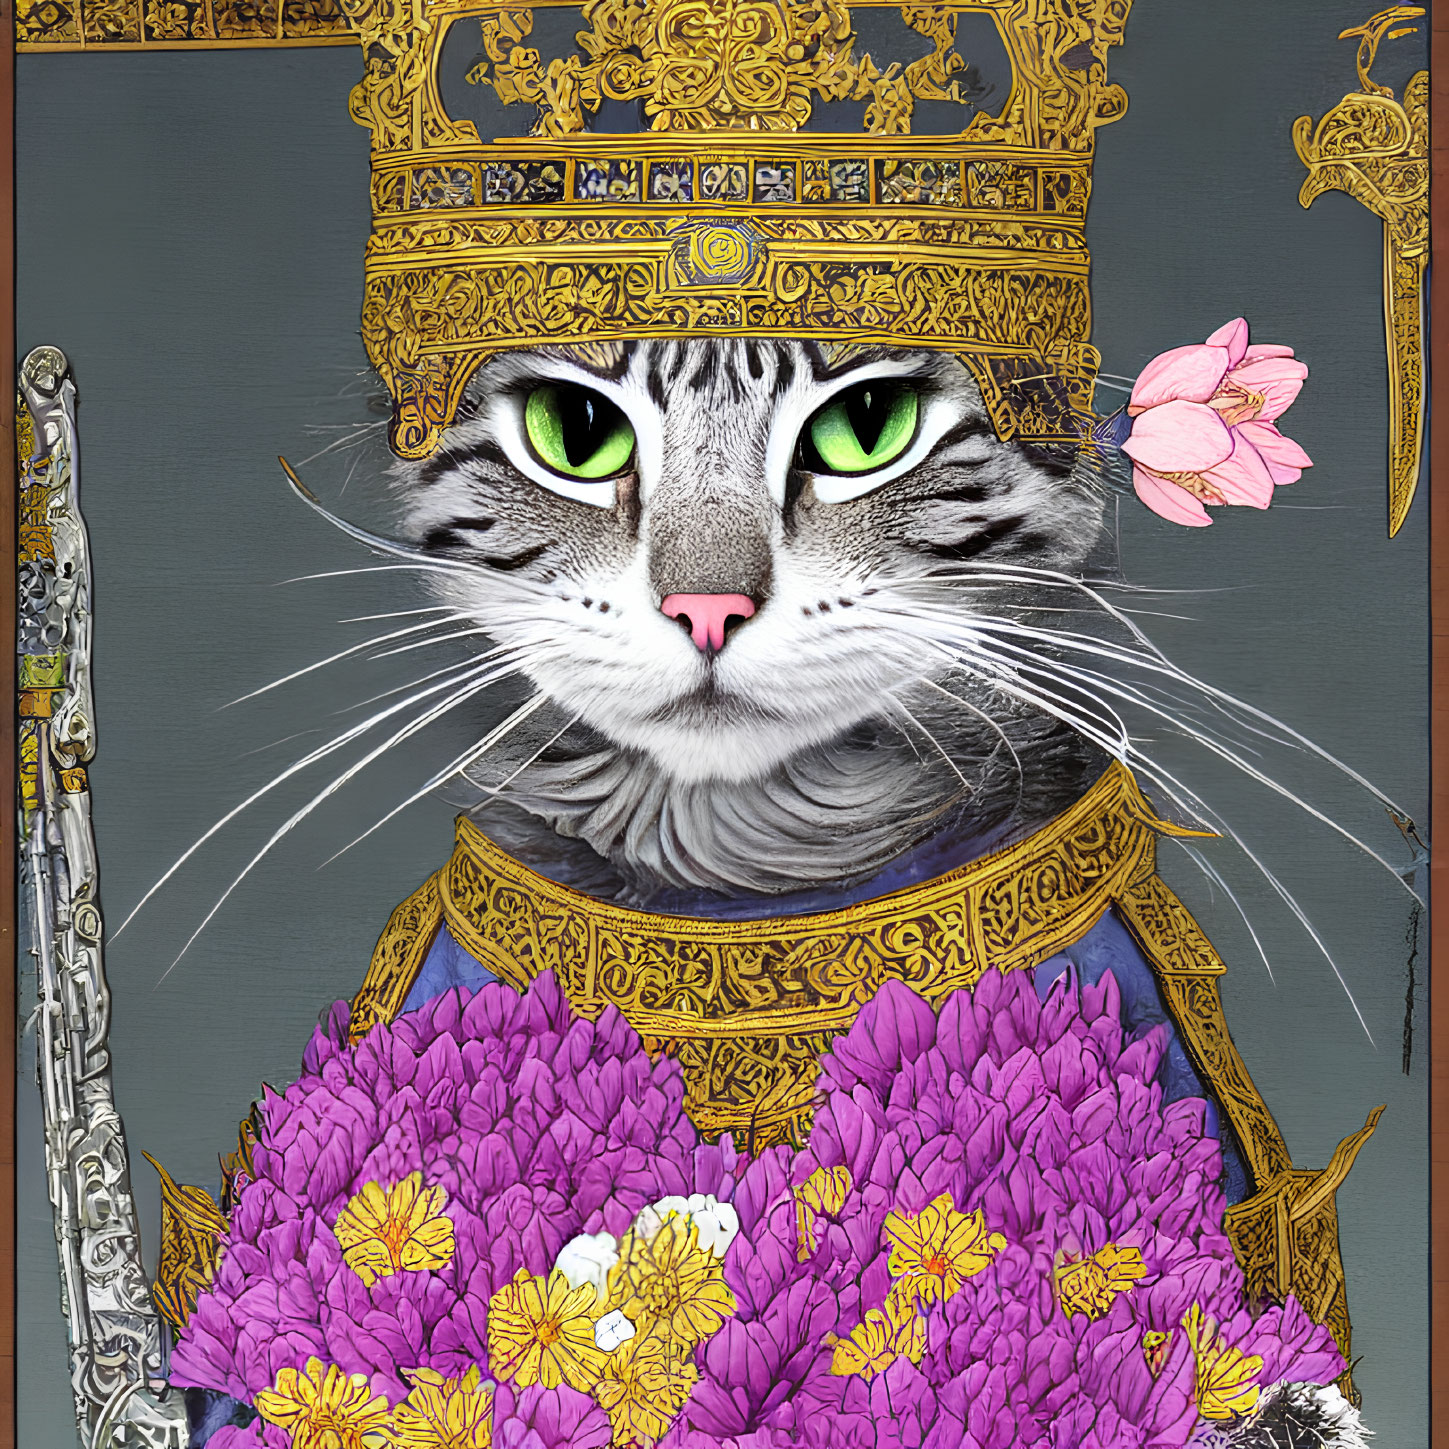 Majestic cat in golden crown and armor with purple flowers on grey background